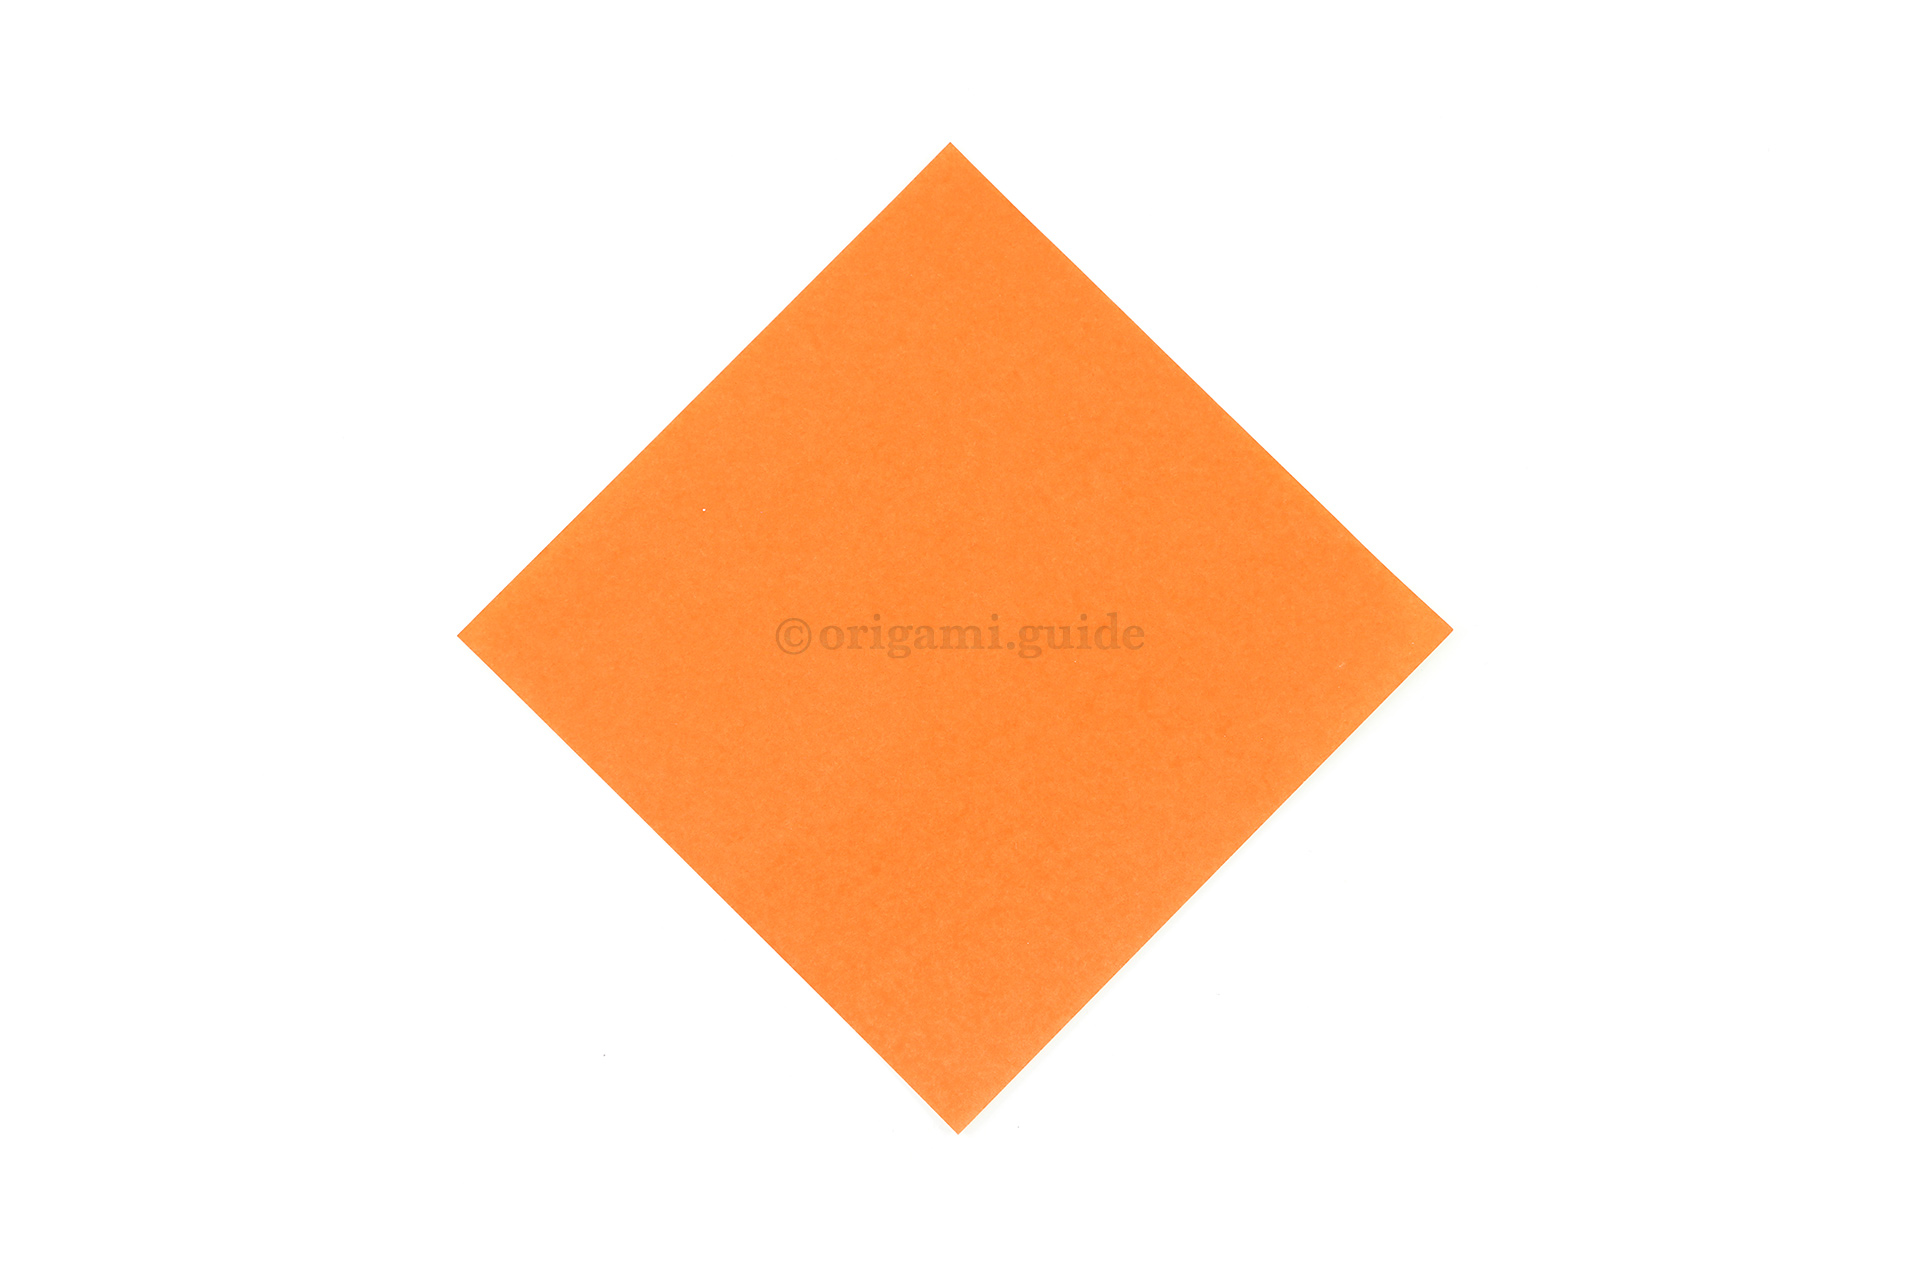 This is the front of our origami paper, our fox will end up being this colour all over.